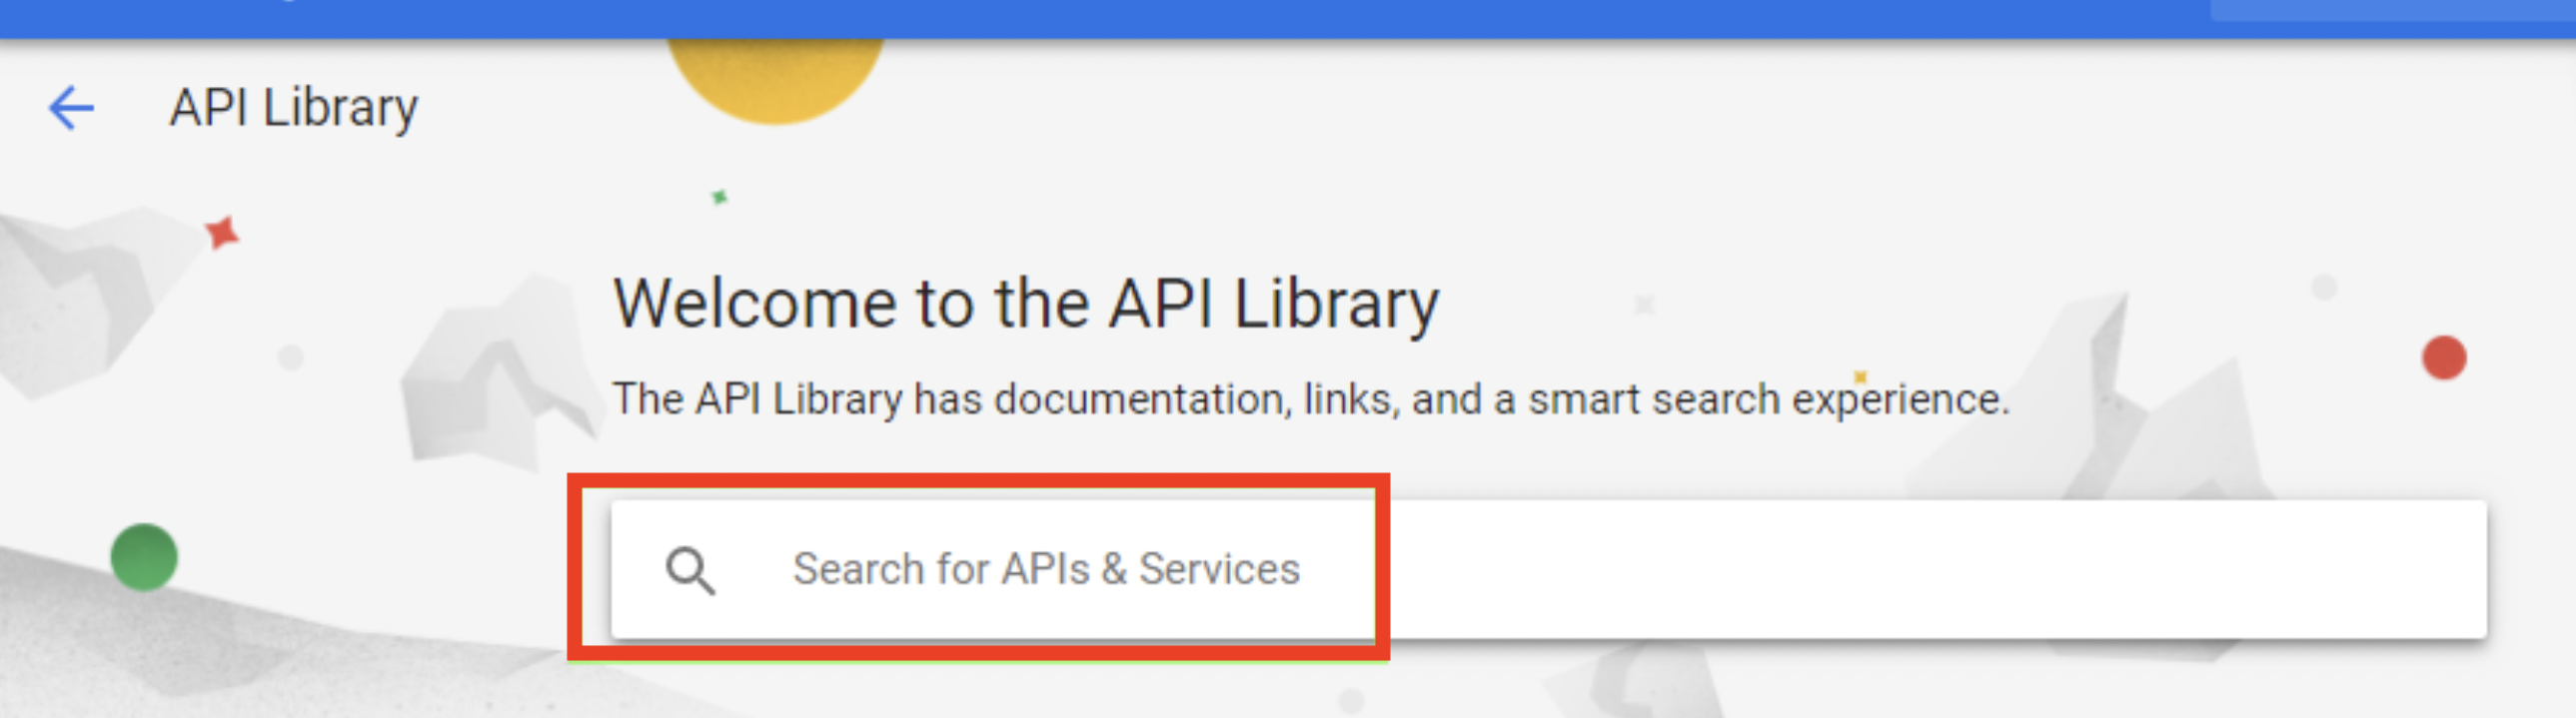 api_library_.png